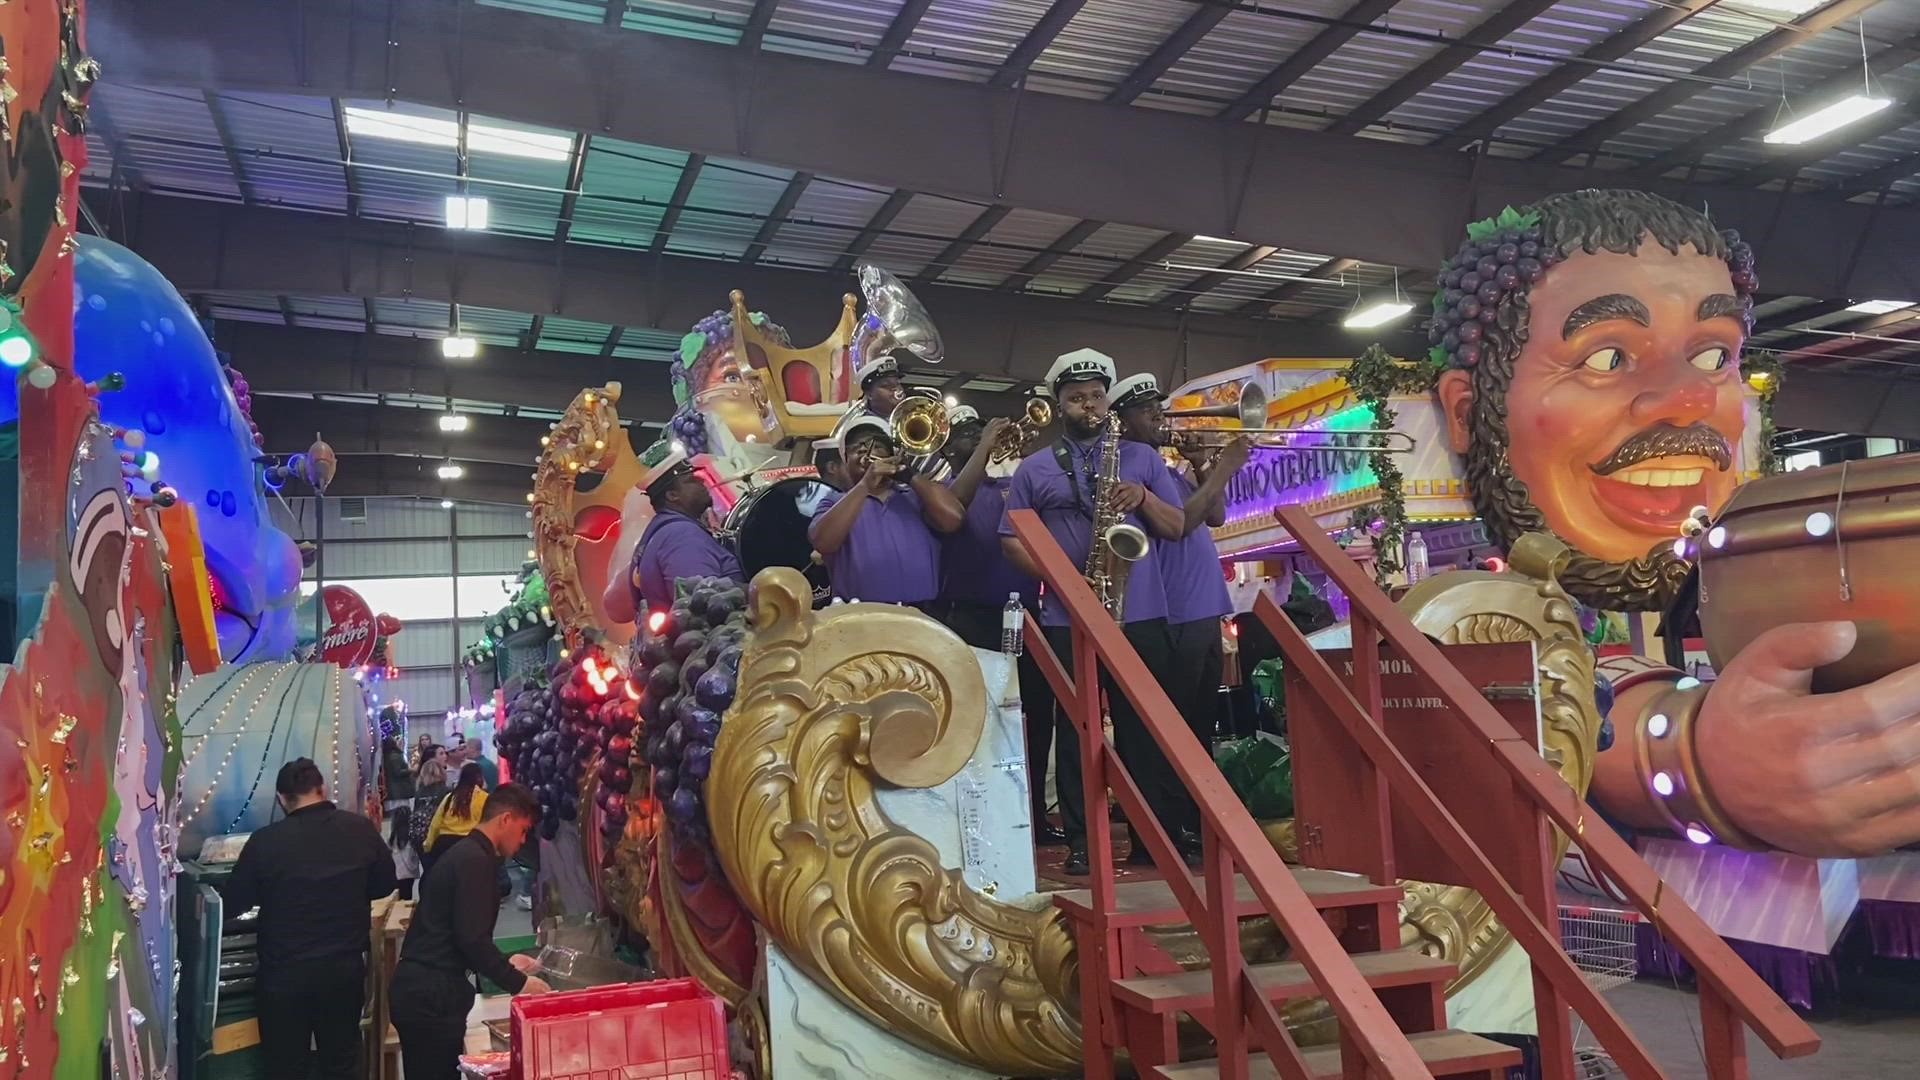 The Krewe of Bacchus will roll on Sunday, Feb. 19.